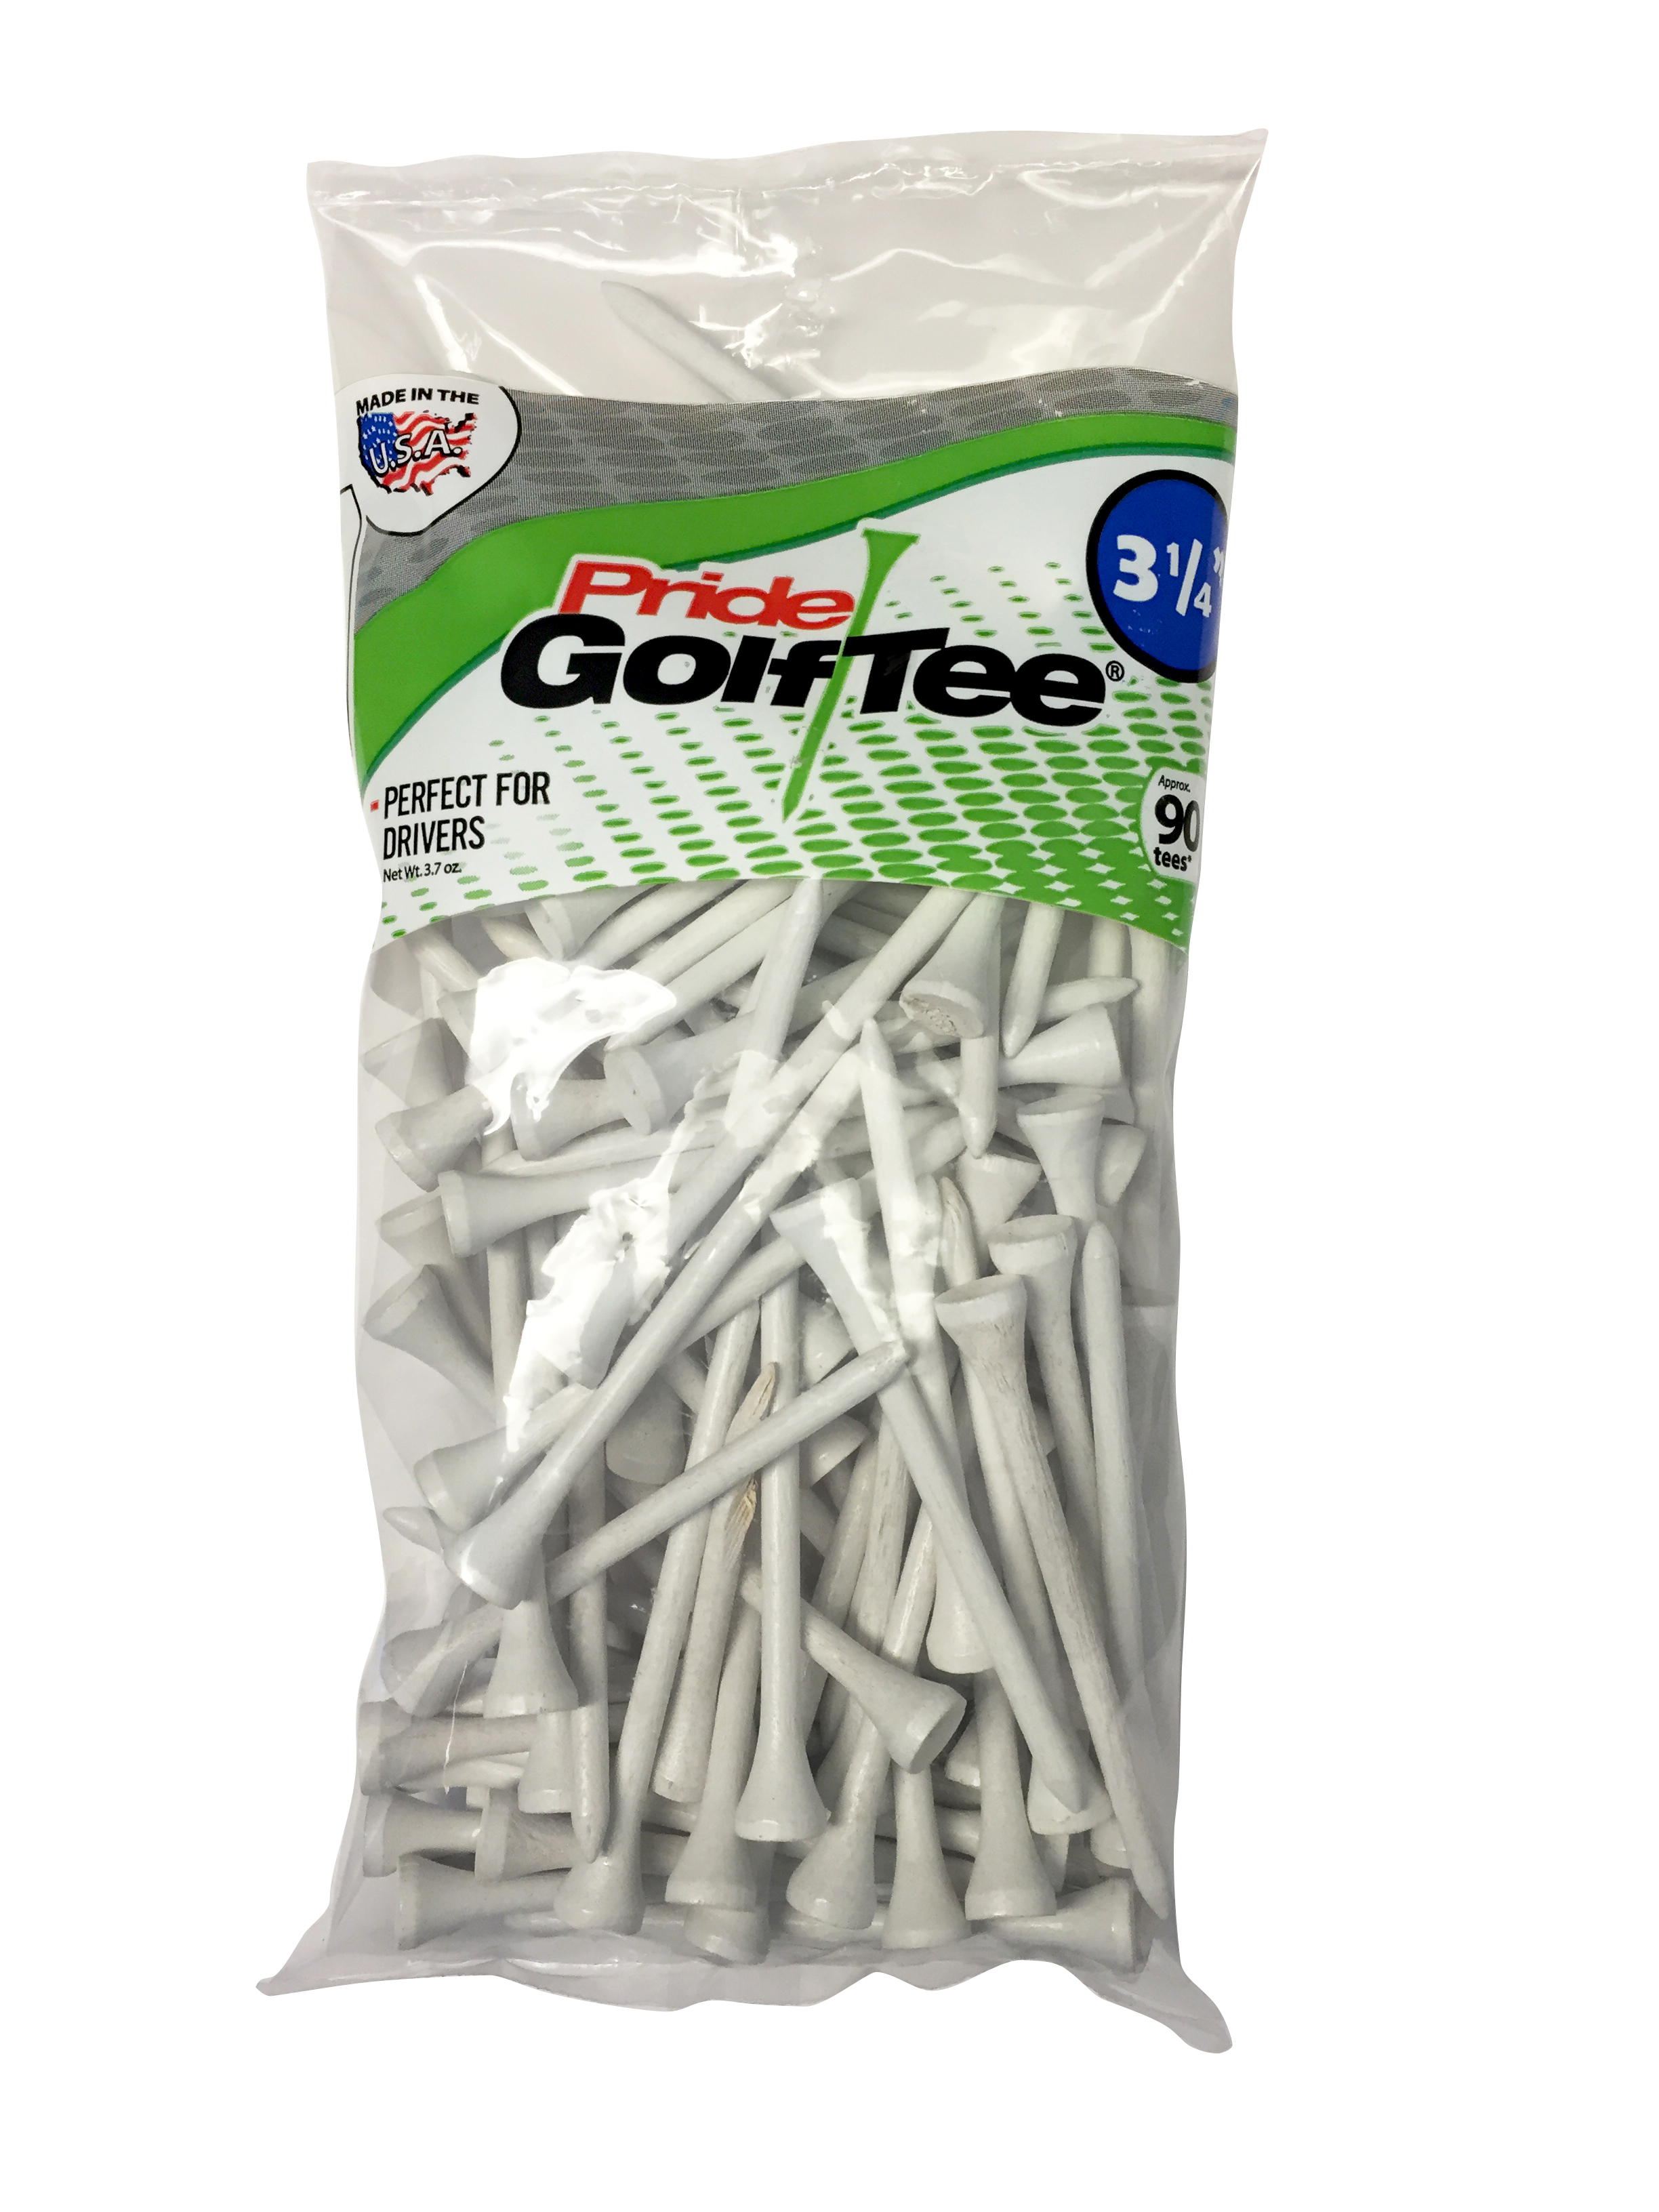 Pride Wood Golf Tee, 3-1/4 inch, White, 90 Count - image 1 of 6